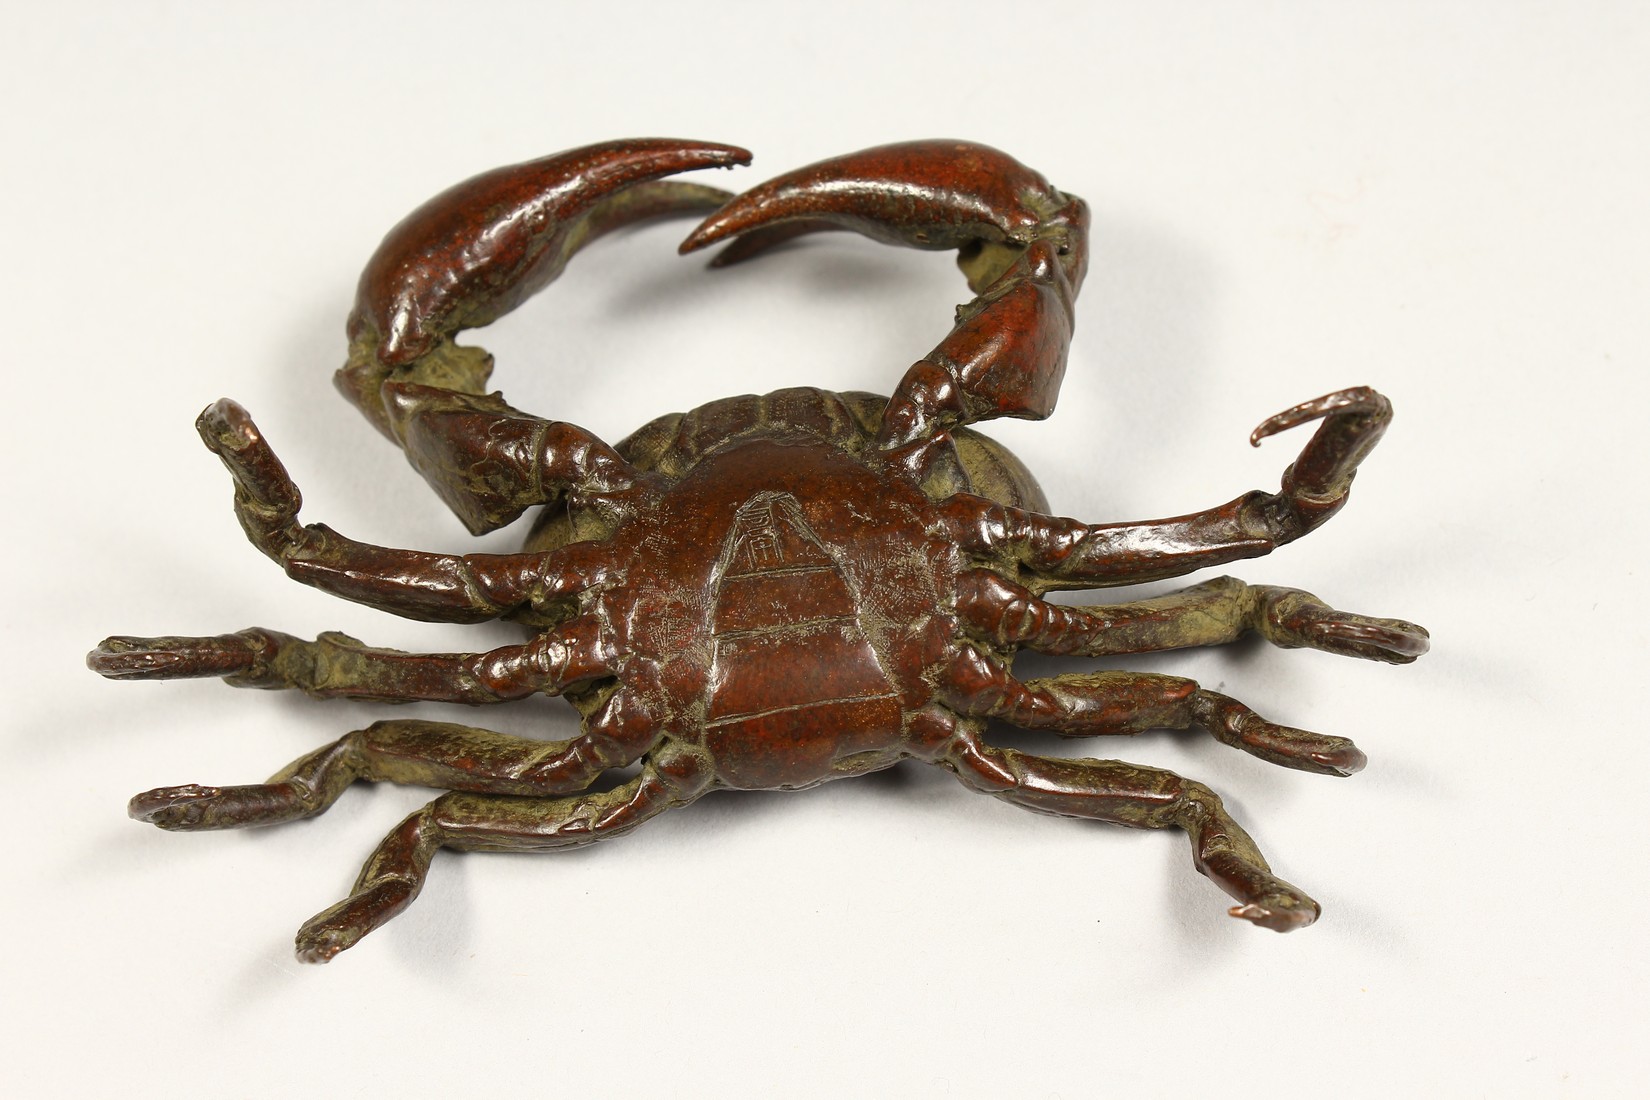 A JAPANESE BRONZE CRAB 4ins long - Image 4 of 4